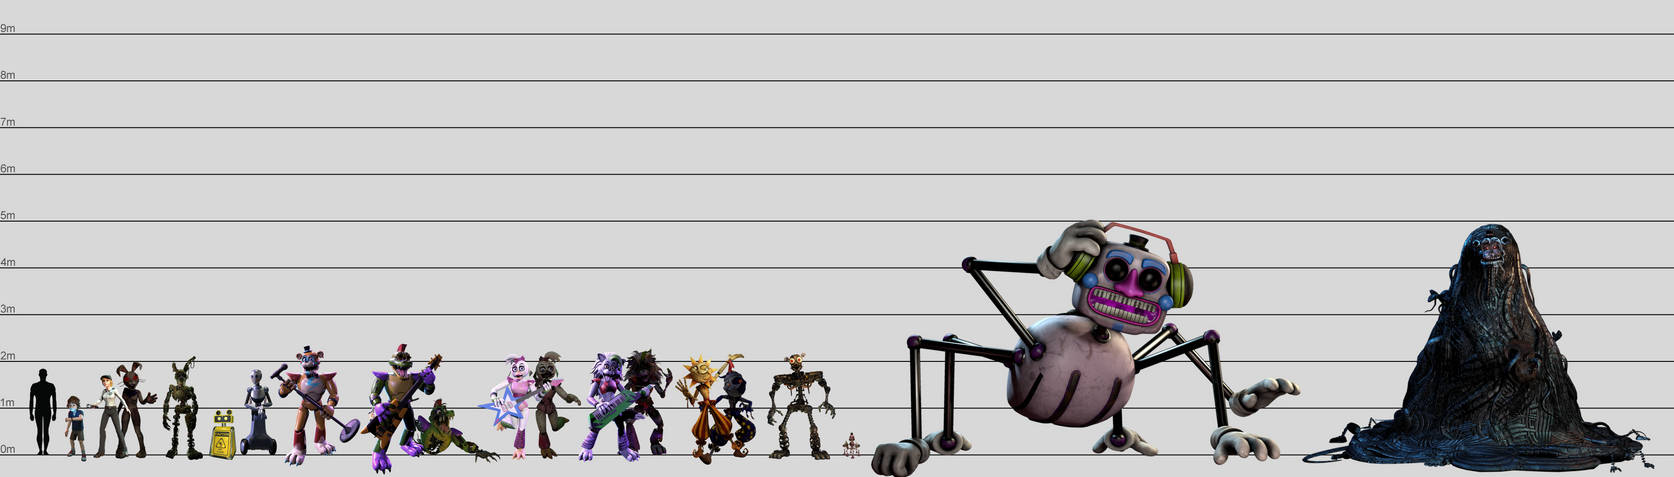 FNaF Security Breach Character size comparison chart, made by me